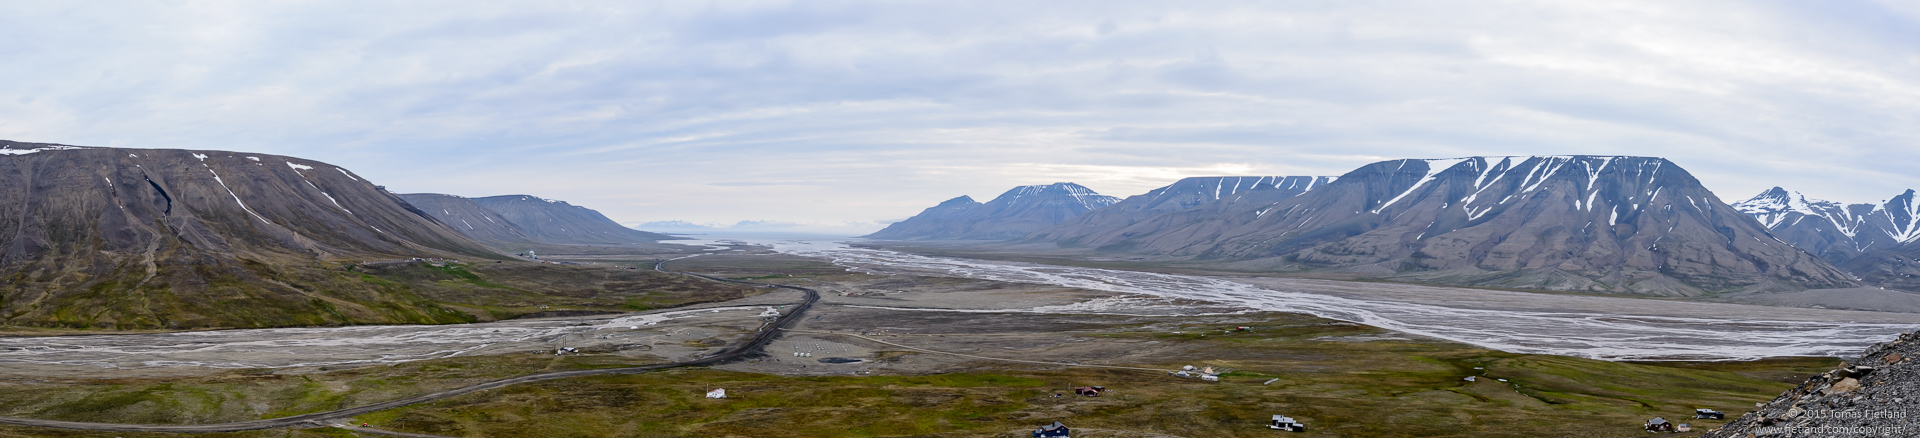 Panorama of Adventdalen towards Isfjorden and Longyearbyen